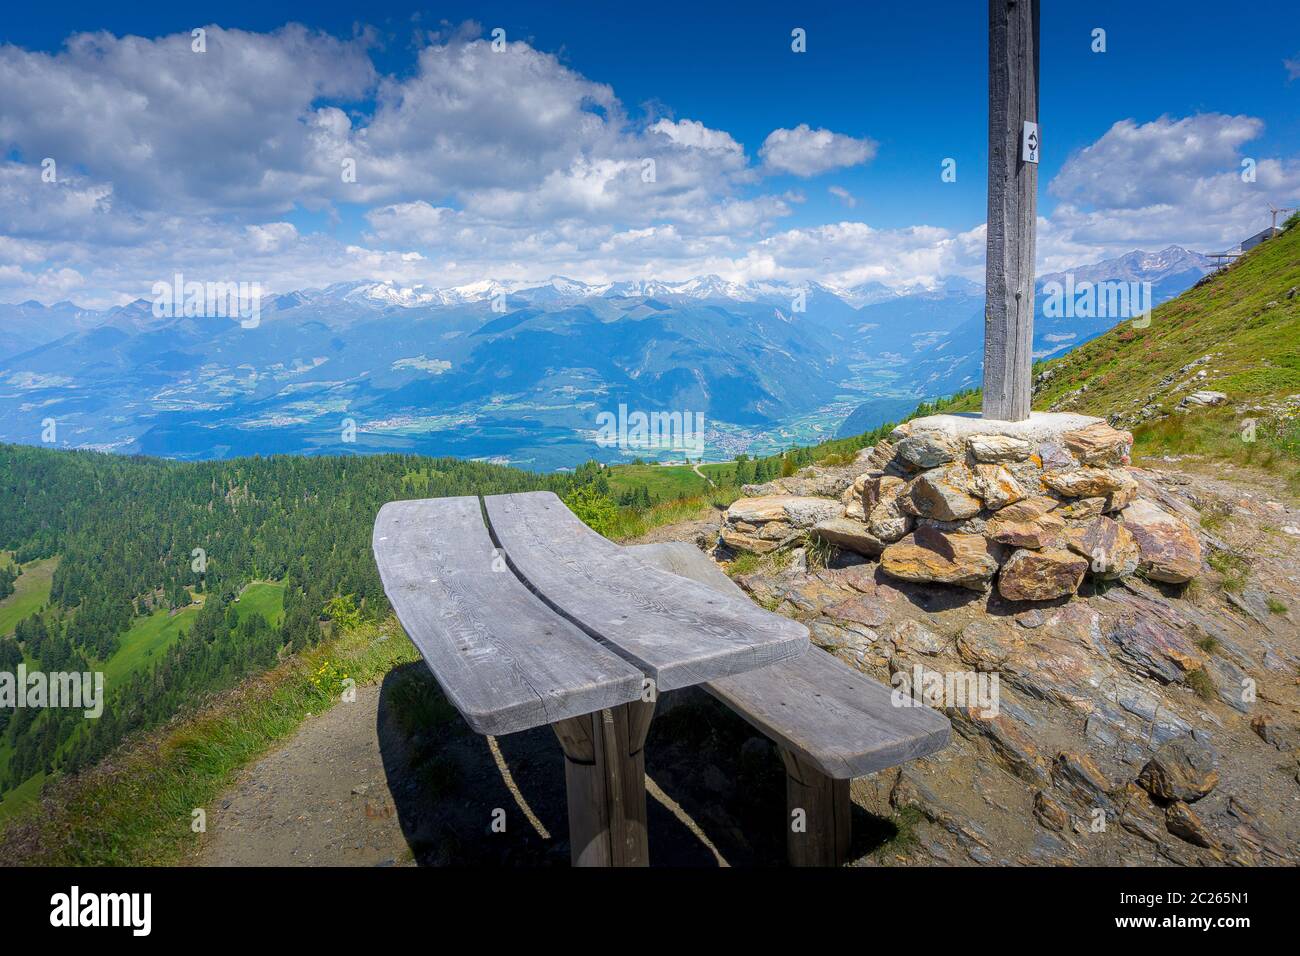 Sitting Groupe on Plan de Corones in South Tyrol Stock Photo